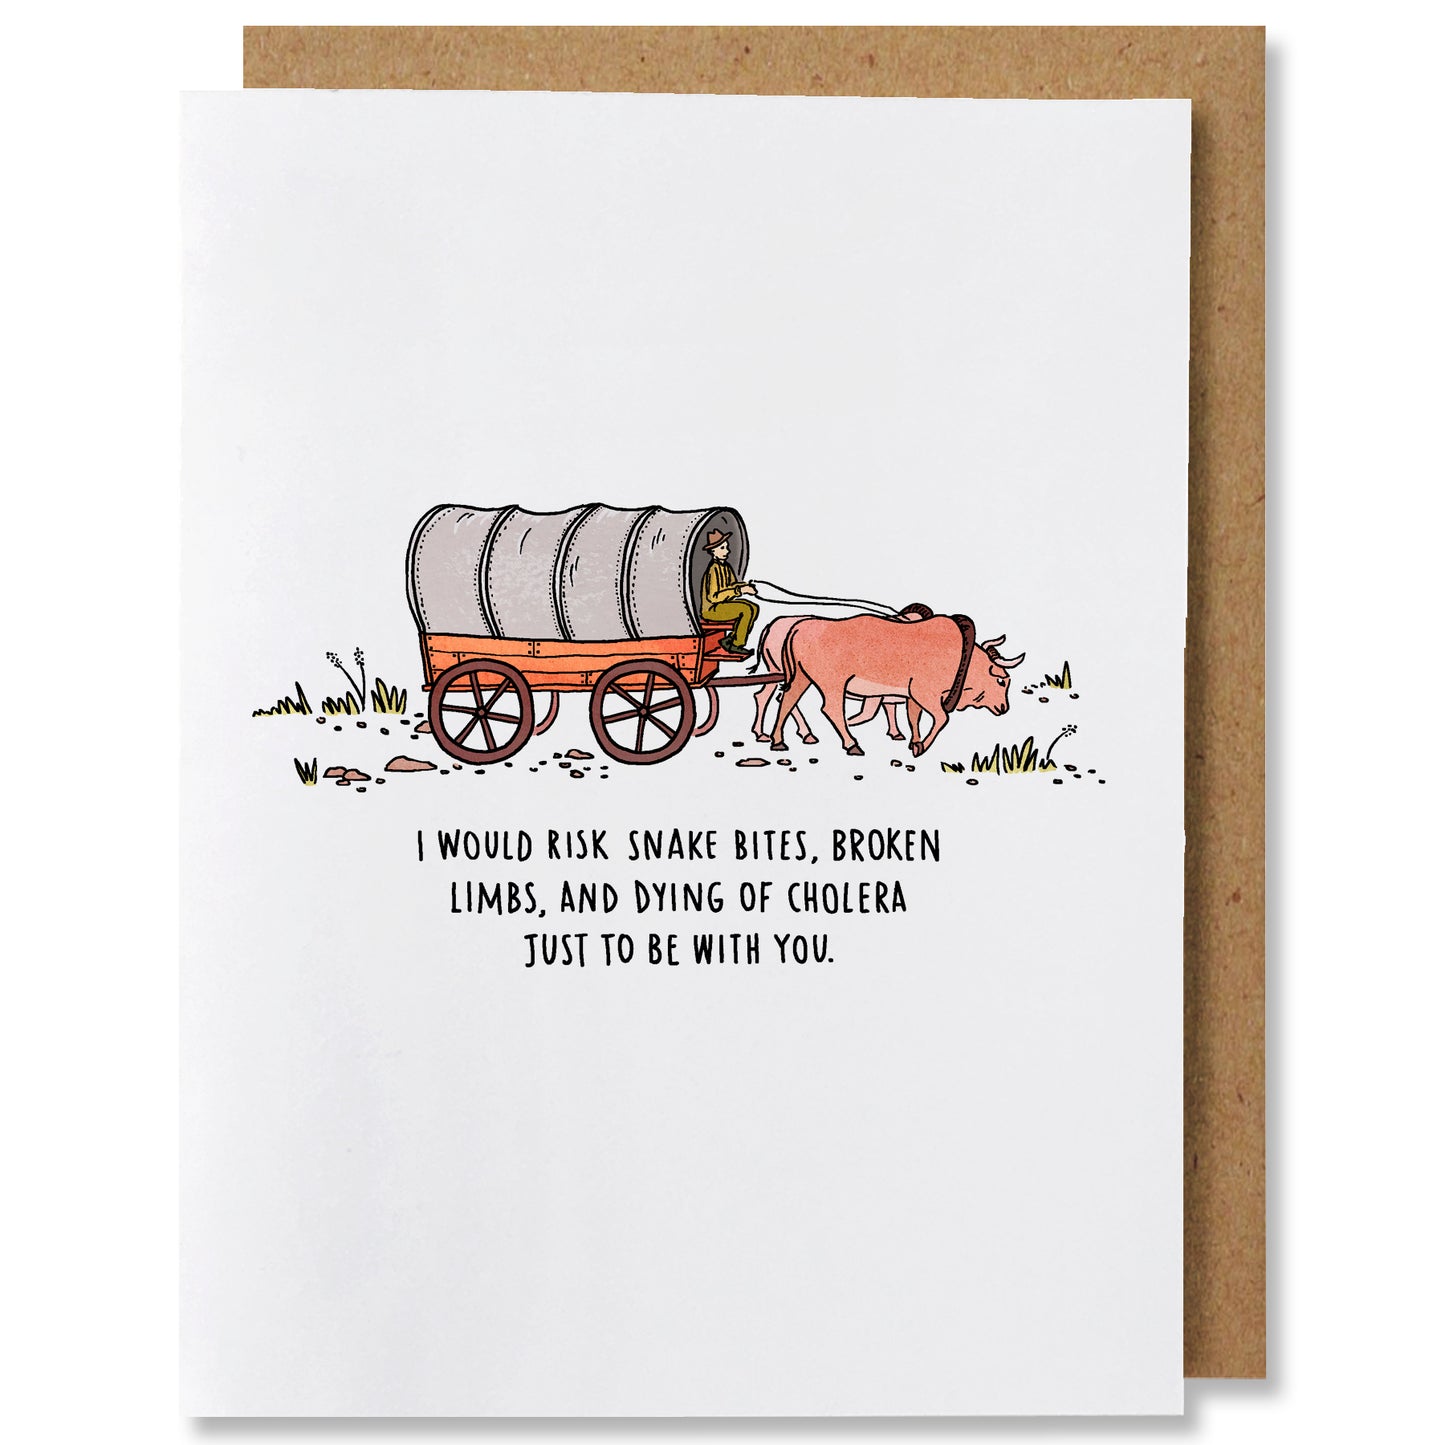 Illustrated love greeting card featuring a canvas and wood, Oregon Trail wagon pulled by 2 brown oxen, led by a person dressed in green sitting on the wagon perch, card reads “I would risk snake bites, broken limbs, and dying of cholera just to be with you”